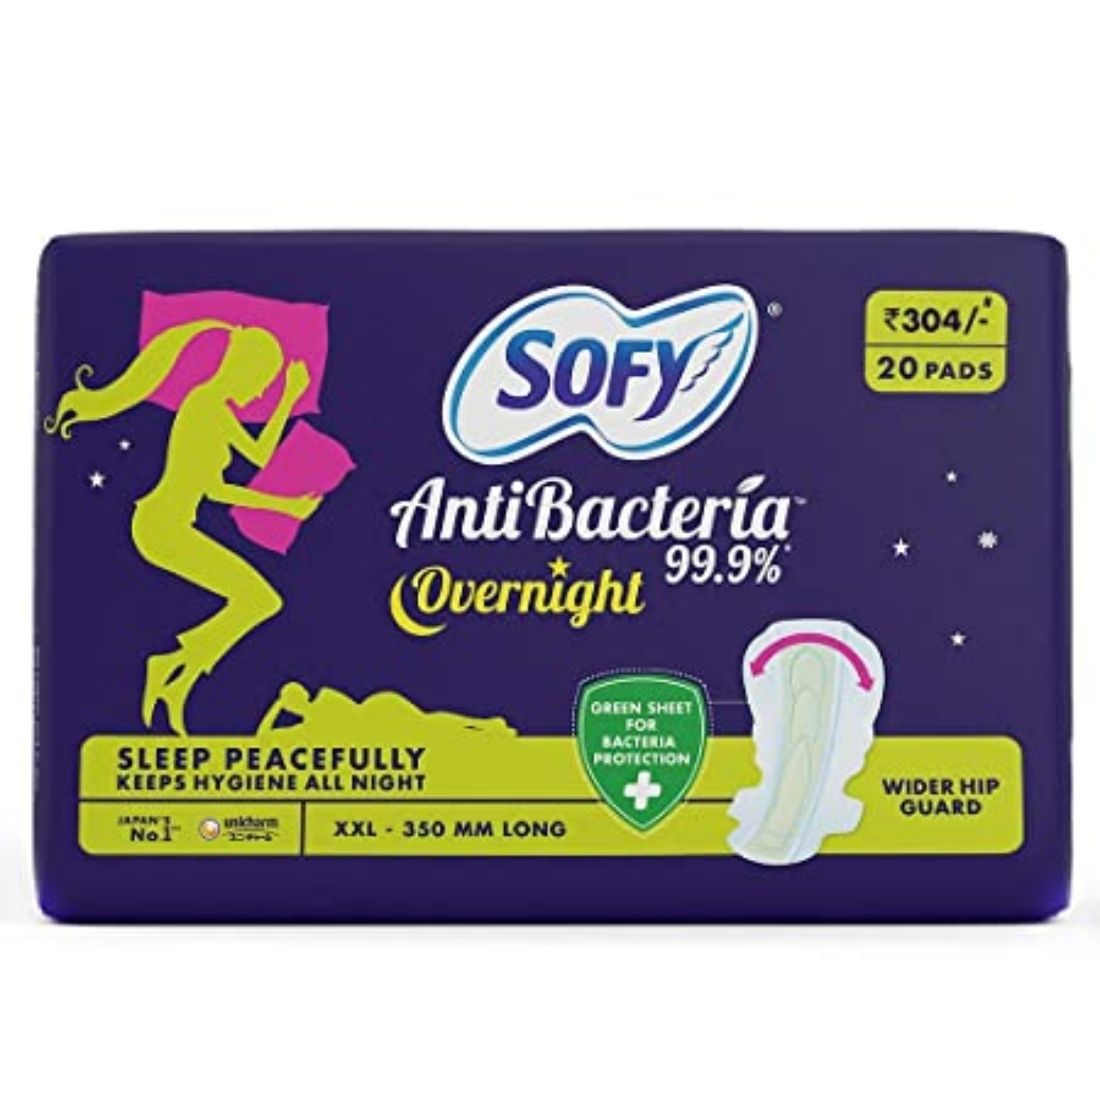 Buy Sofy Antibacteria Extra Long Pads Online at Best Price in India